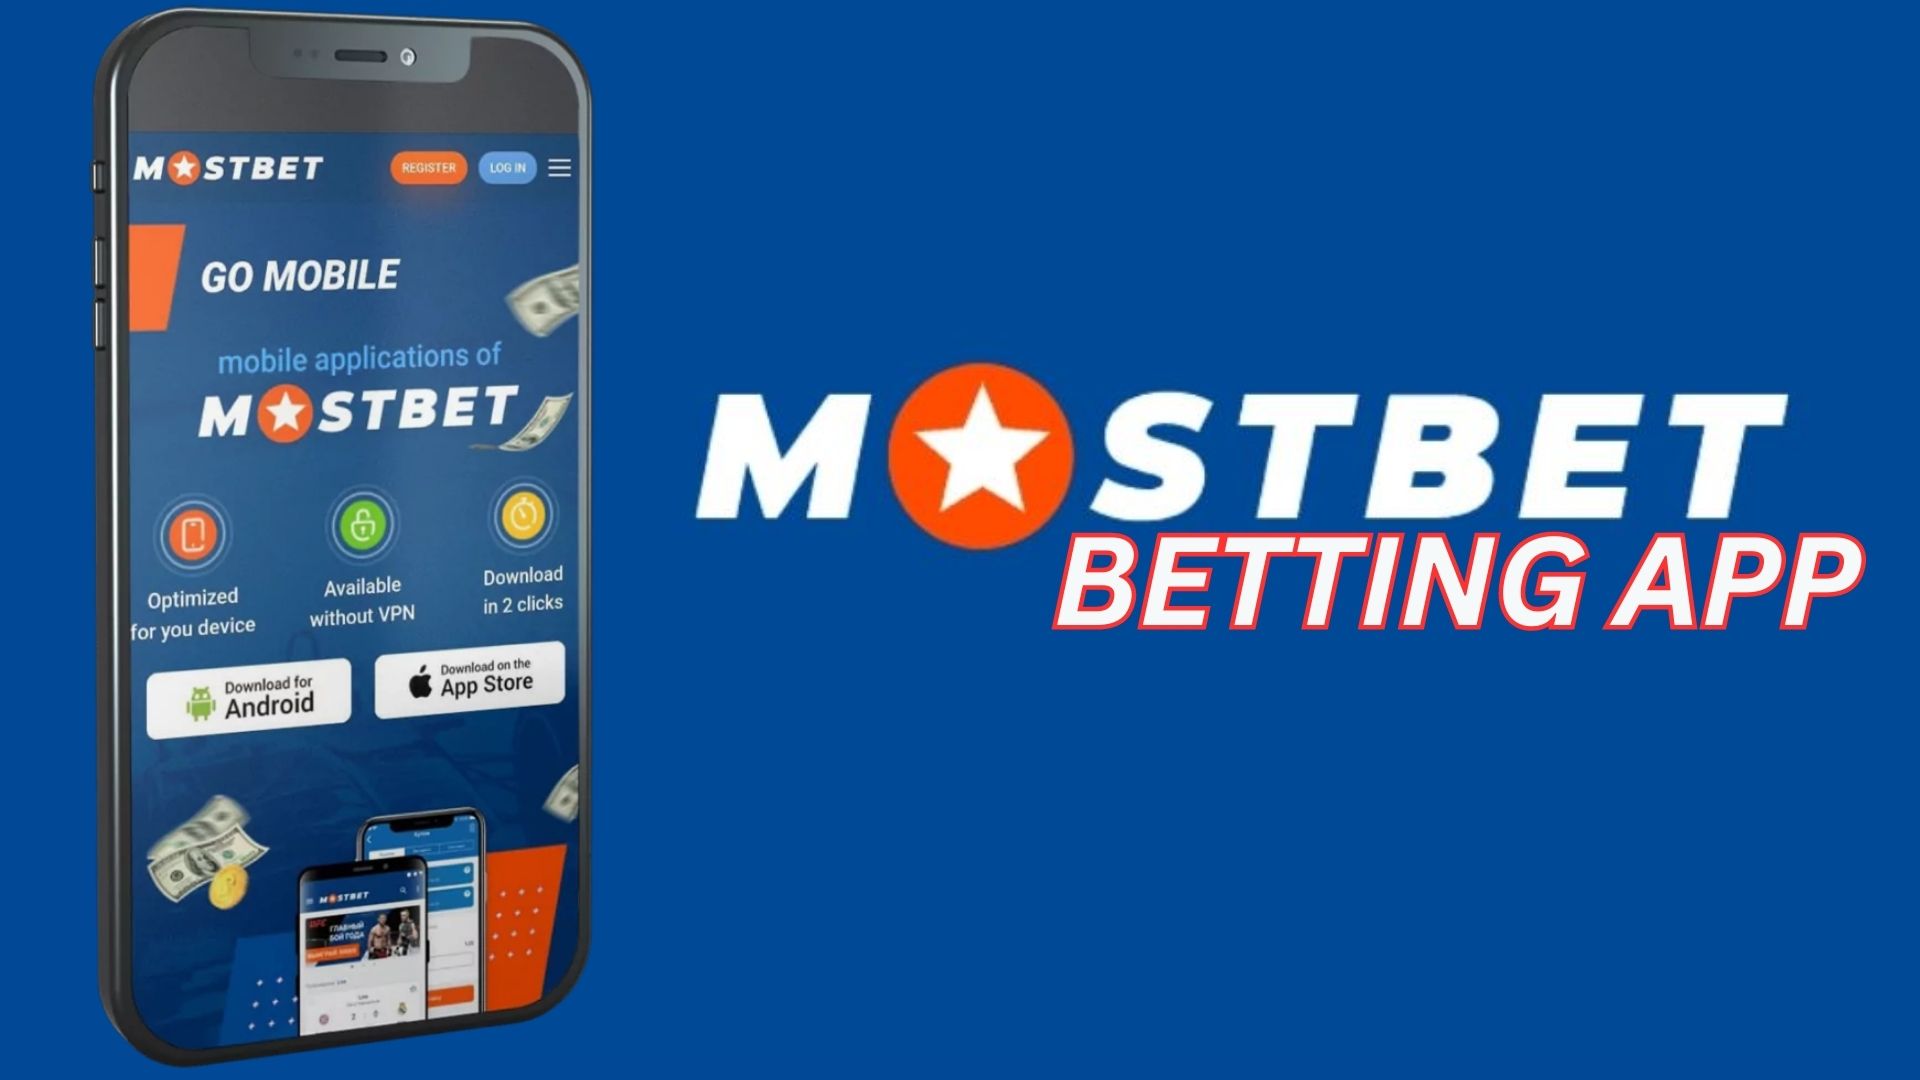 Fall In Love With Login into Mostbet in India